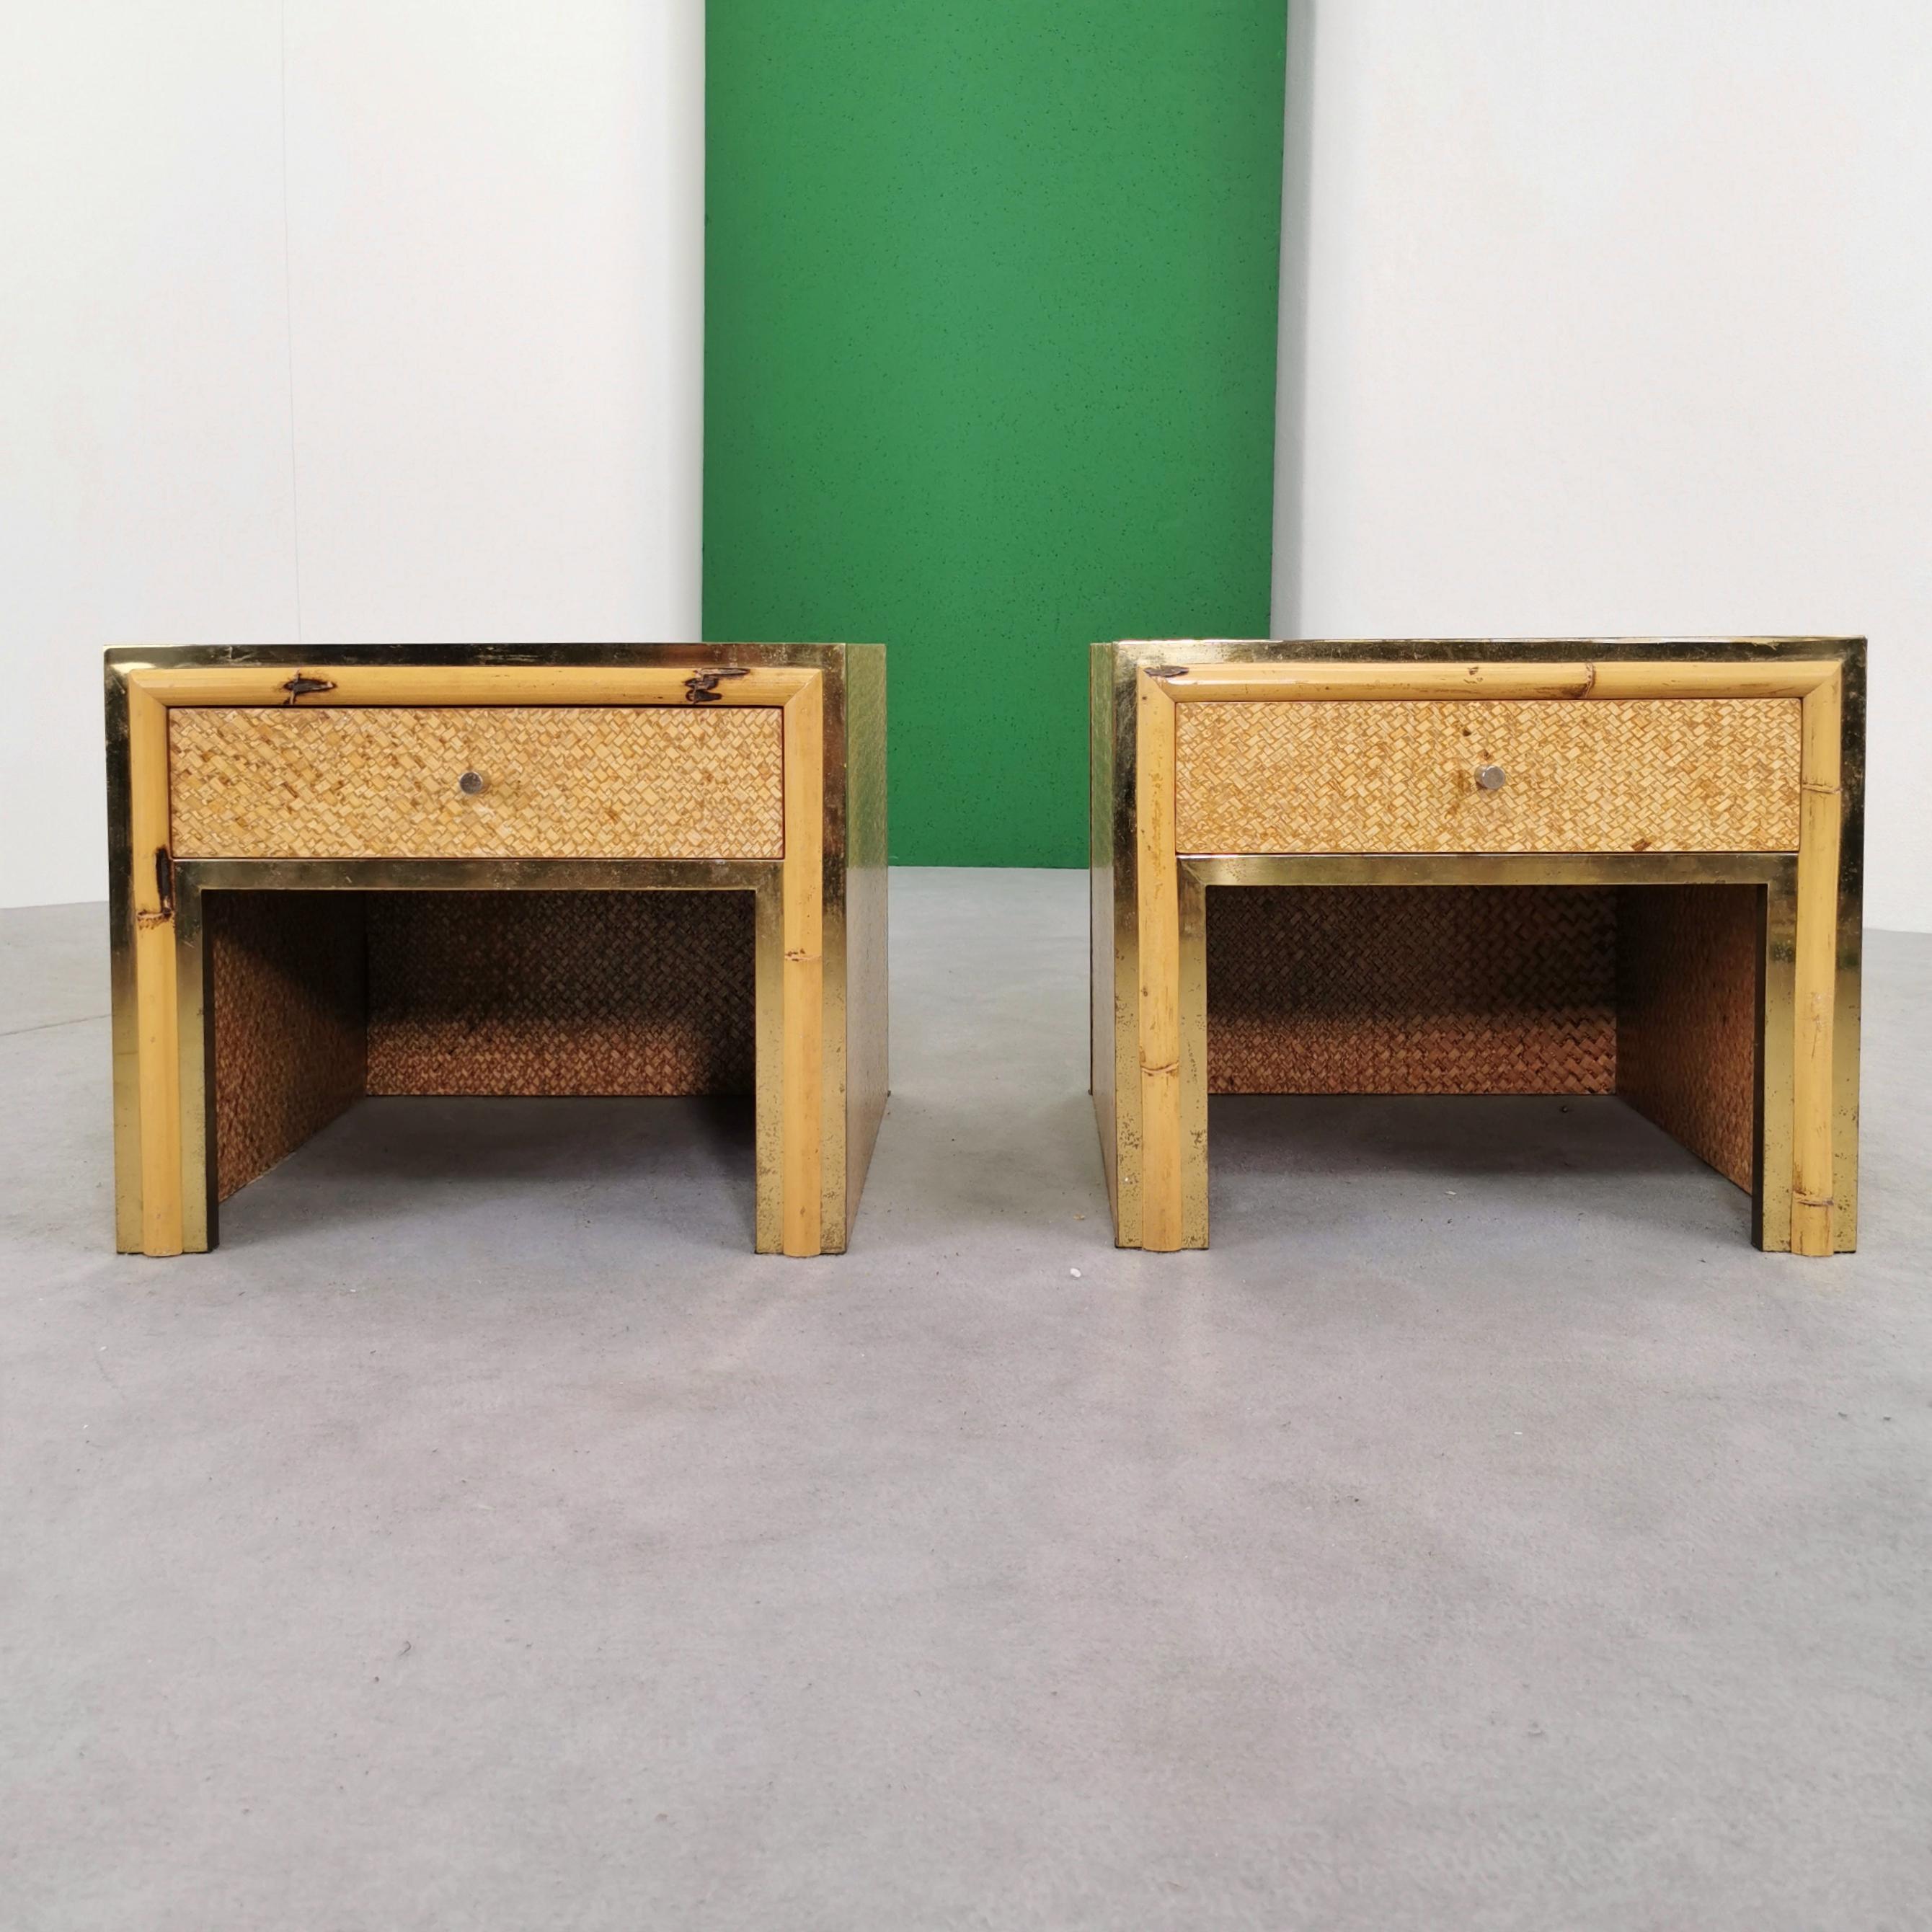 Rare pair of vintage 1970s production nightstands made of clear enameled rattan and brass and bamboo frame. The nightstands present with an image consistent with their age but without any particular signs or defects. directly usable.